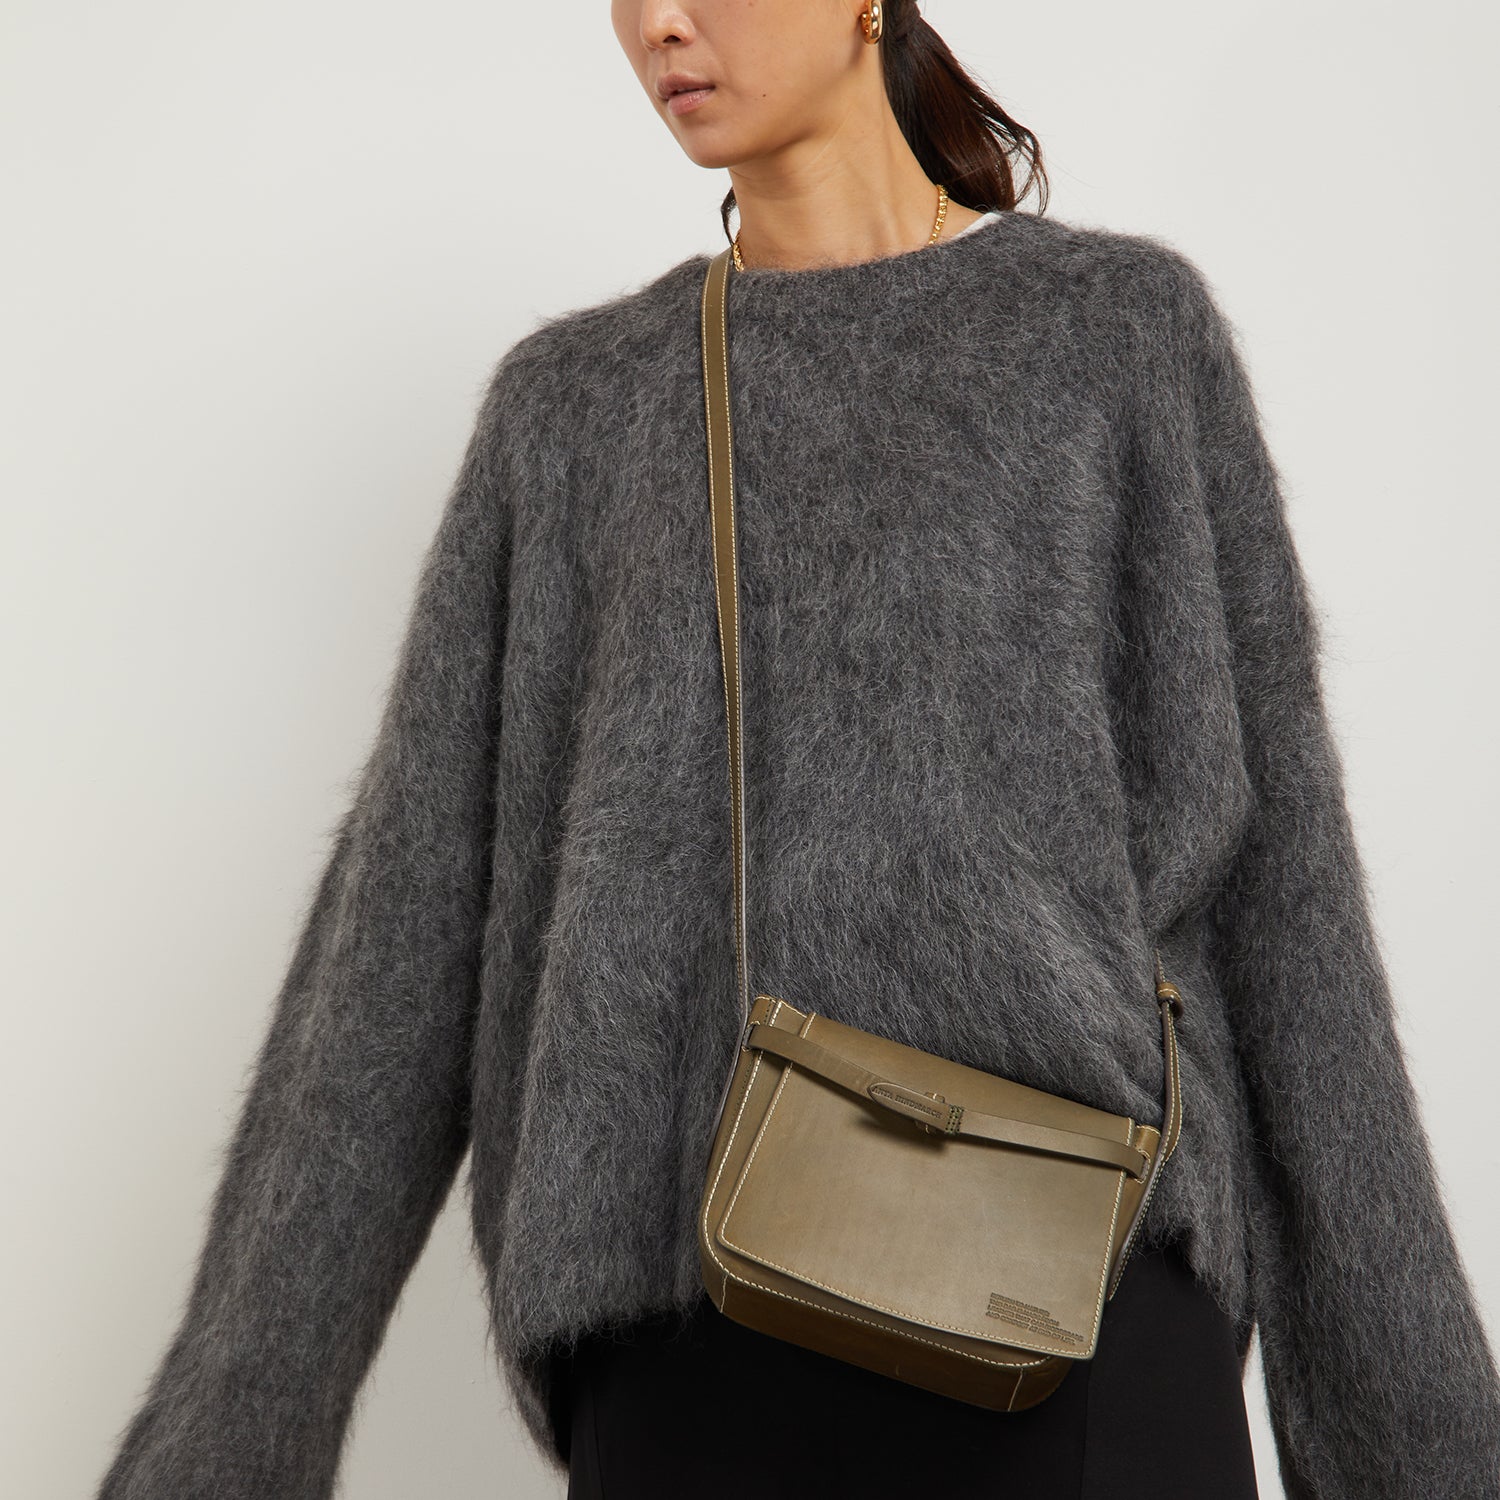 Return to Nature Cross-body -

                  
                    Compostable Leather in Fern -
                  

                  Anya Hindmarch UK
